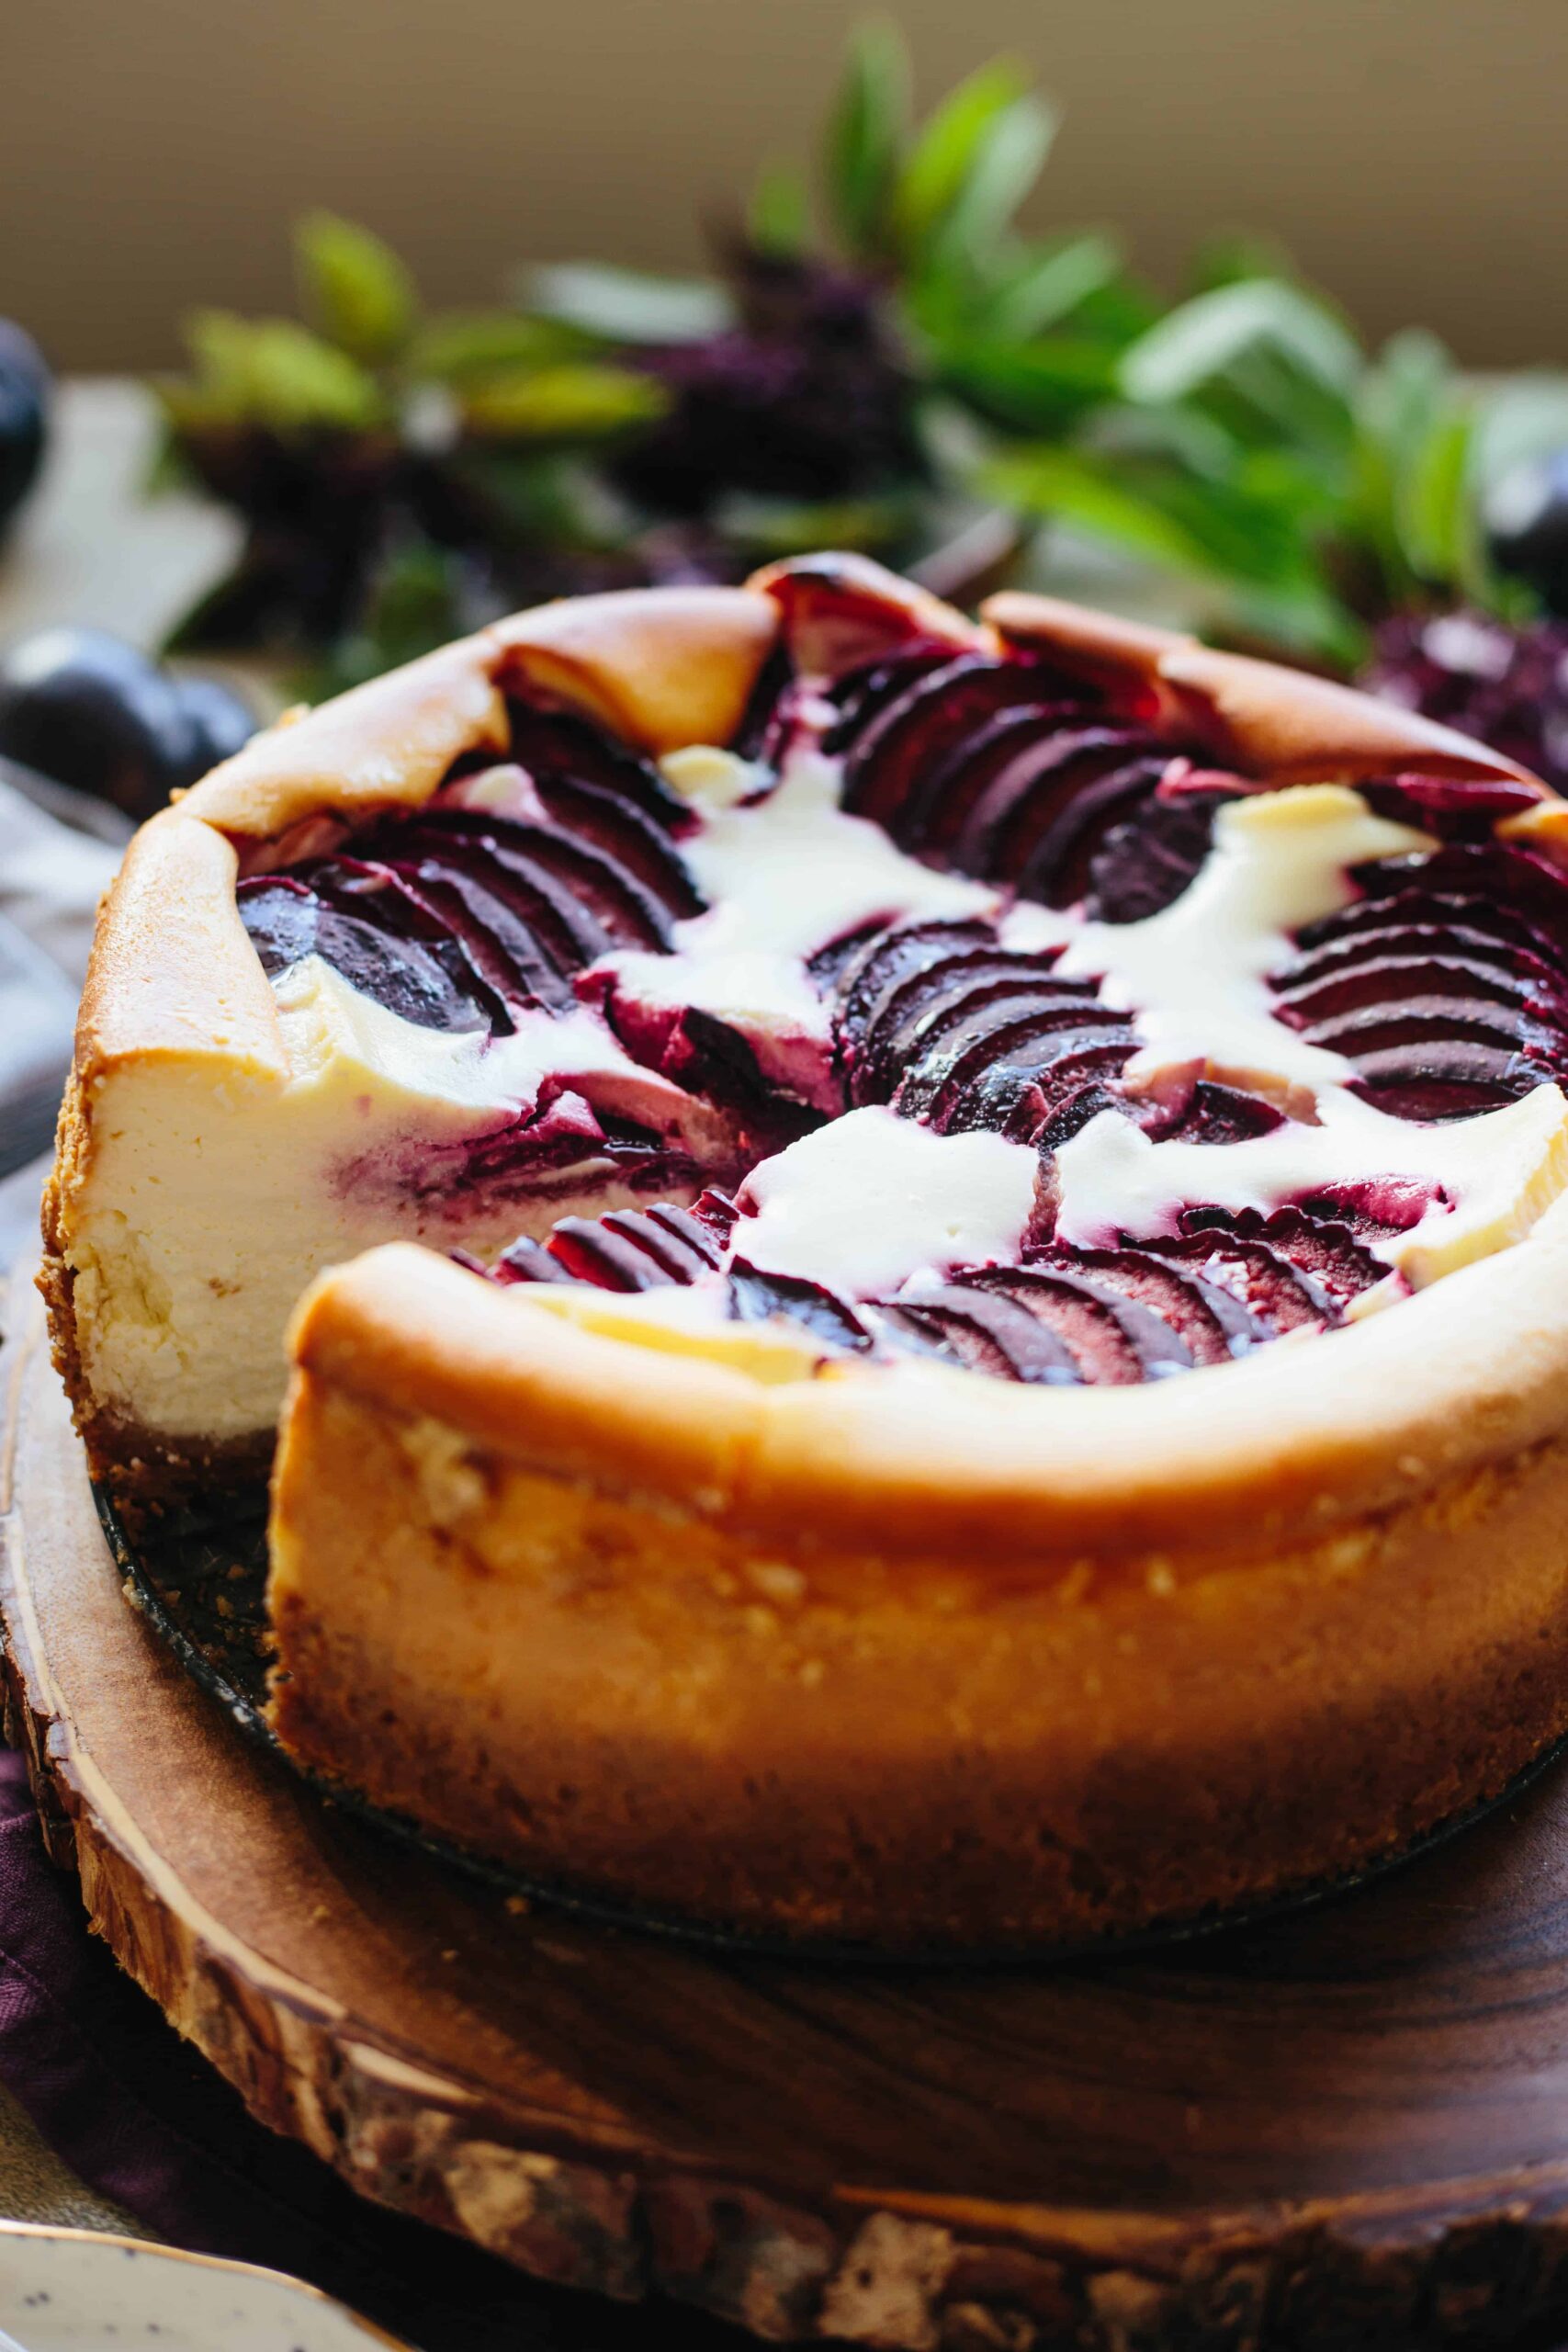 Ricotta Cheesecake with Plums